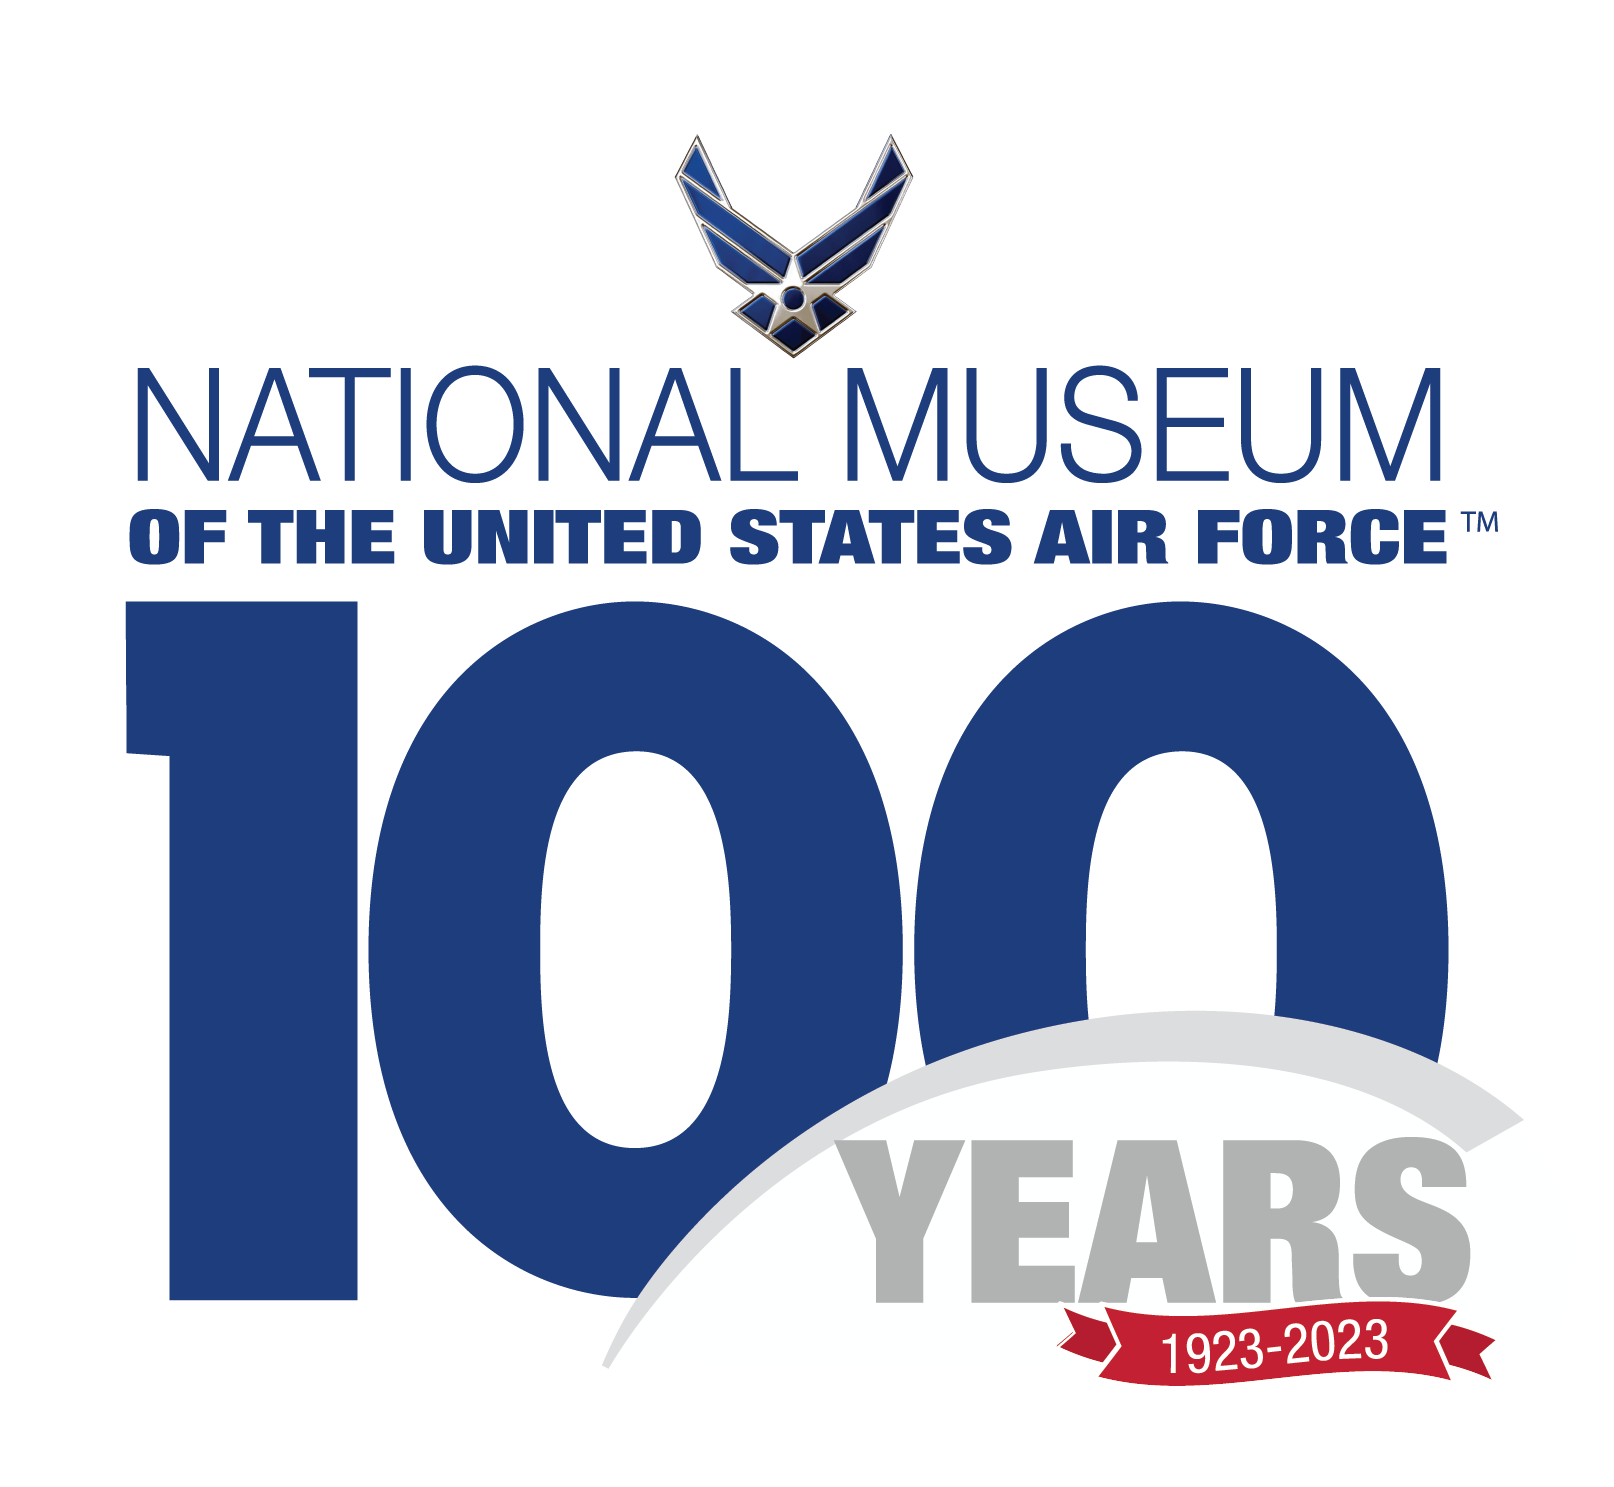 100th Anniversary Logo with the 100 in large letters and the museum logo